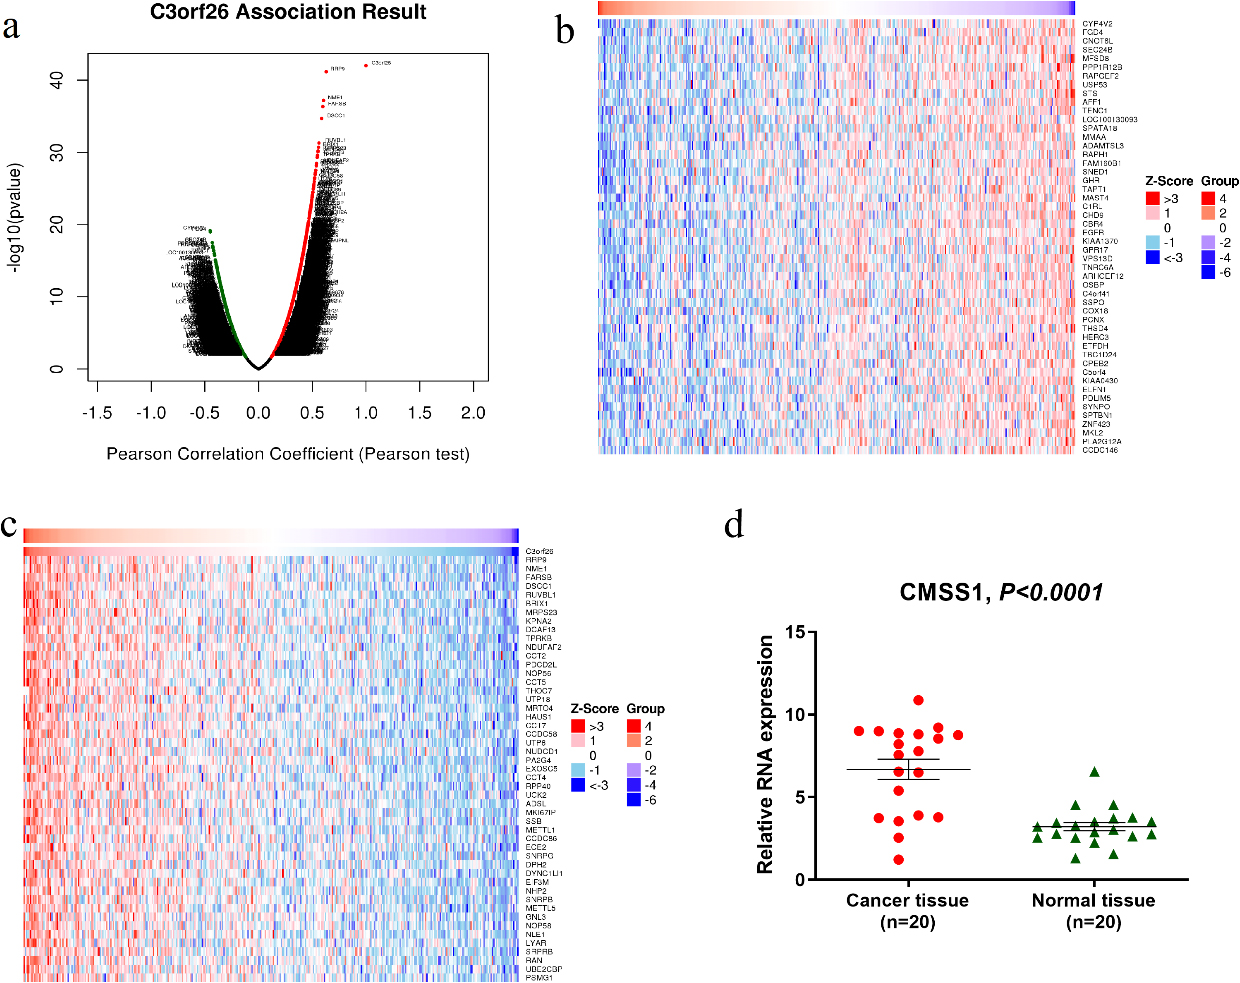 Differentially expressed genes related to CMSS1 in LIHC (C3orf26 is the alias of CMSS1 gene). (a) Pearson test to analyze the genes associated with CMSS1 expression in LIHC (b, c) Heat maps shows the genes positively and negatively associated with CMSS1 in LIHC (top 50). Red indicates positively correlated genes and green indicates negatively correlated genes. (d)The mRNA expression of CMSS1 in HCC tissues was significantly higher than that in normal liver tissues. 